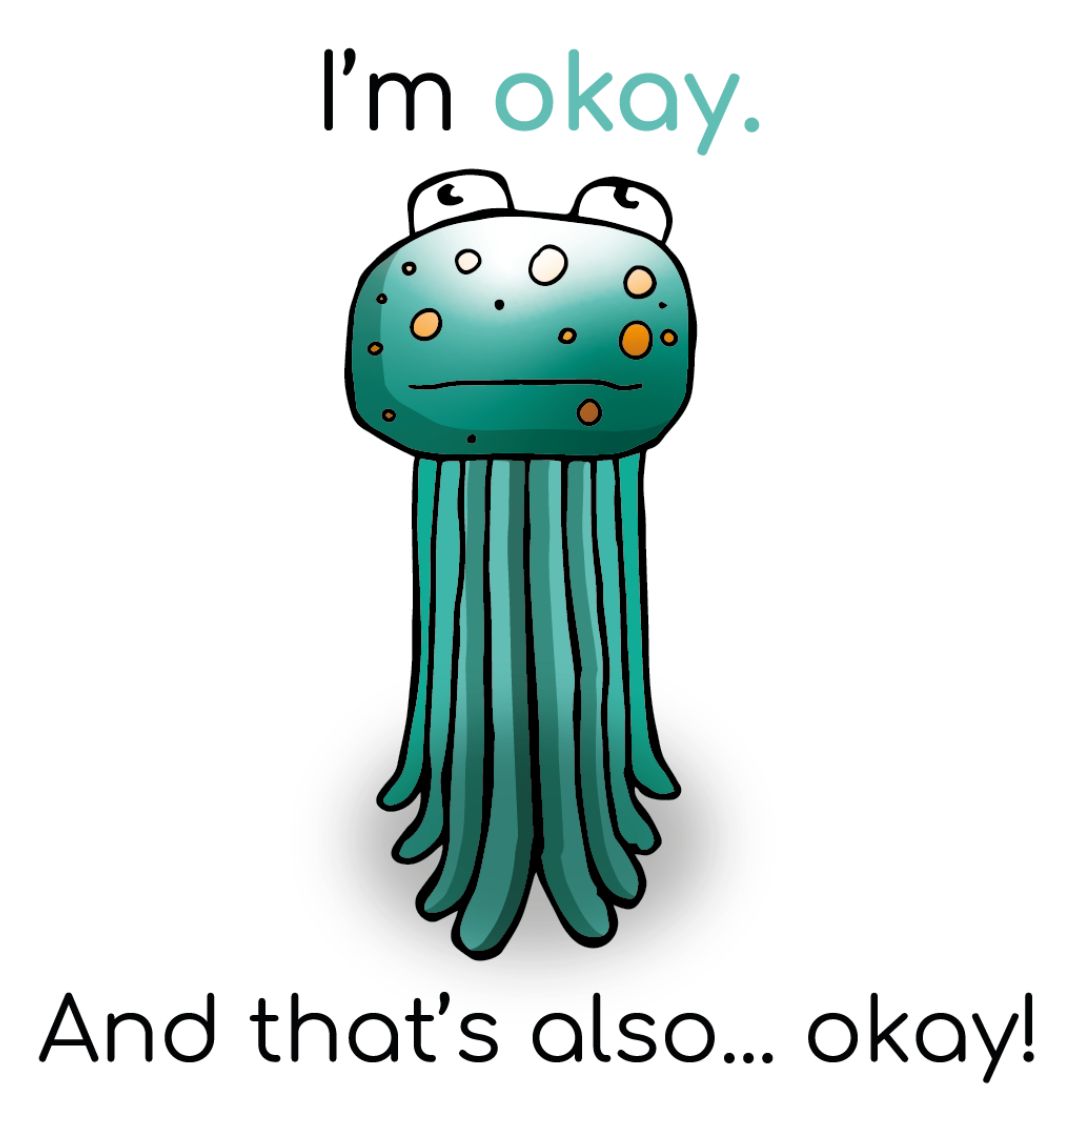 "I'm okay. And that's also... okay!" Round Children's Emotions Sticker 60mm x 60mm